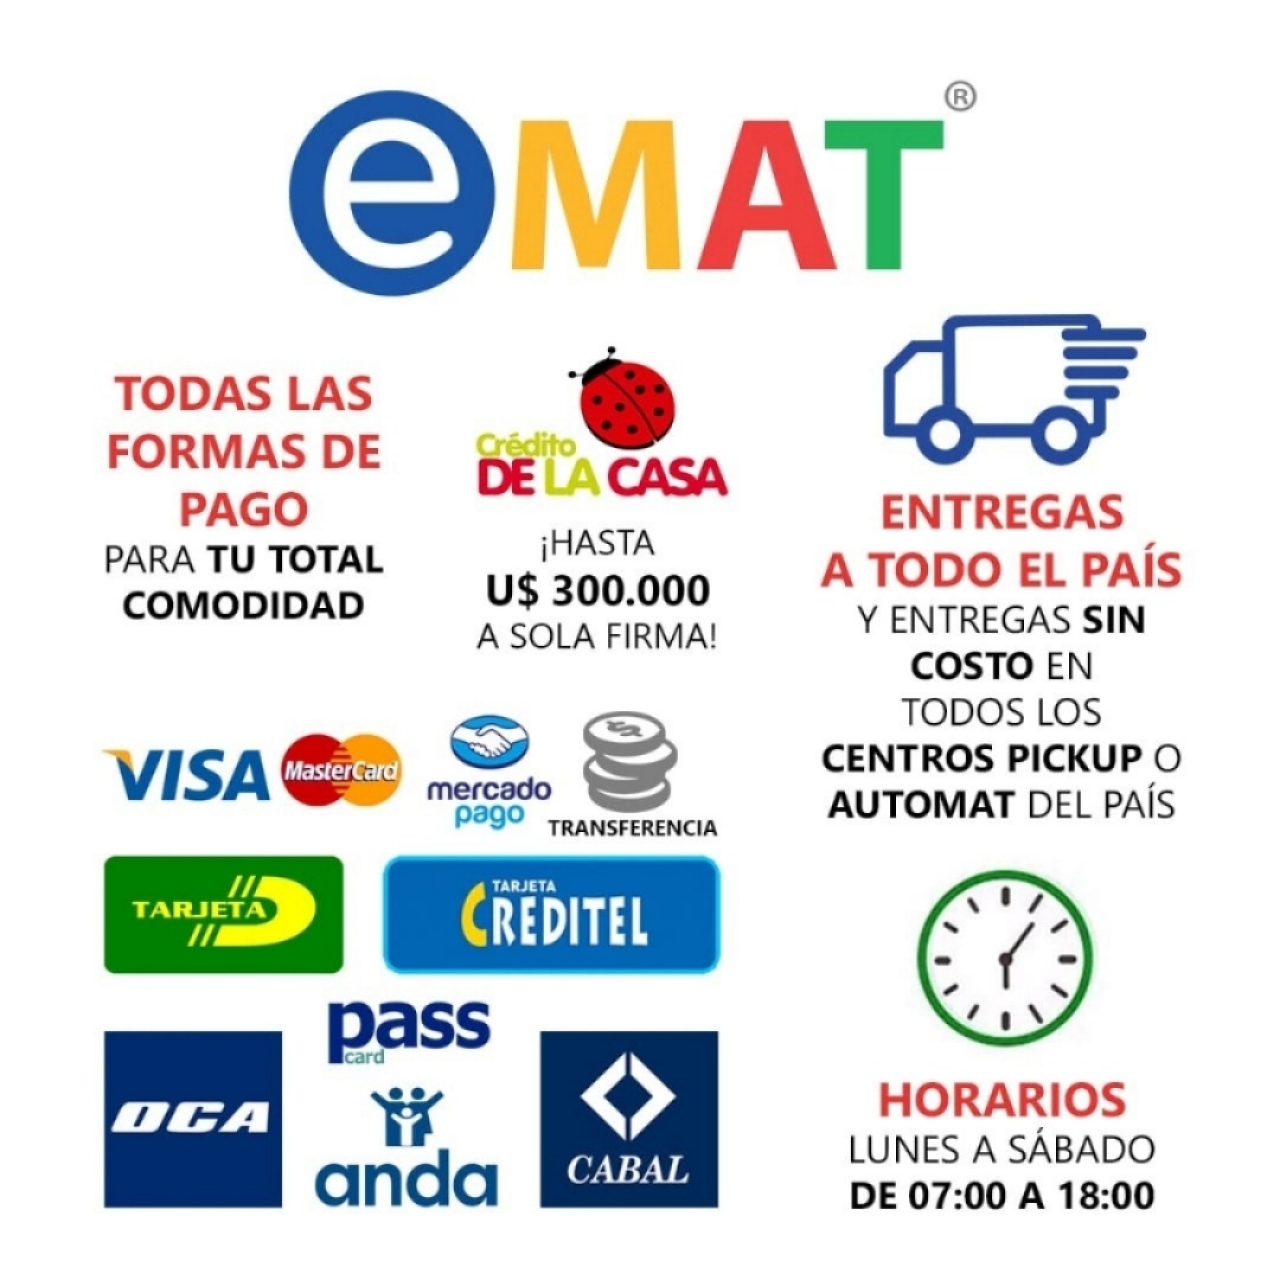 https://www.emat.com.uy/imgs/productos/productos37_18734.jpg